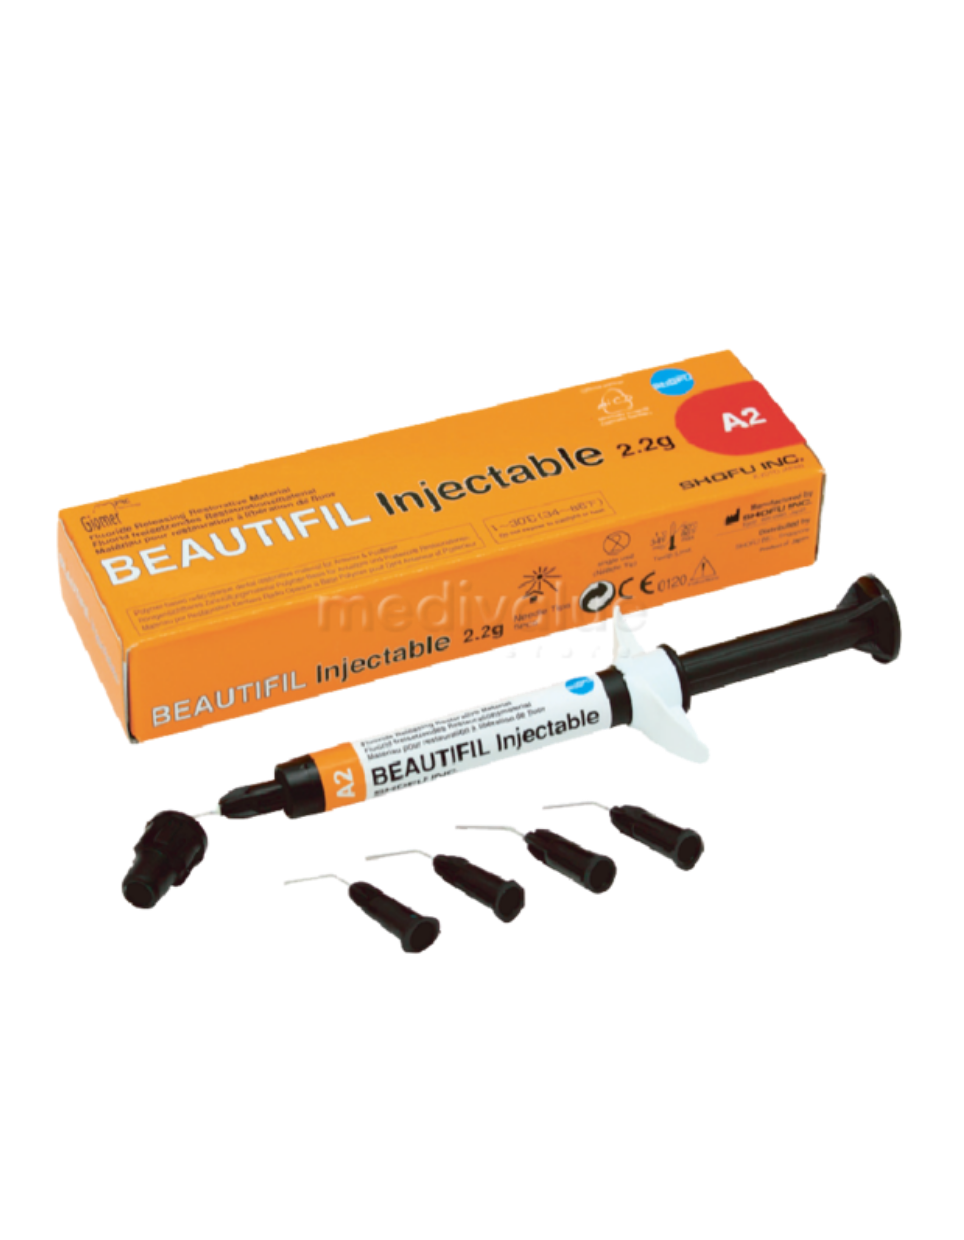 BEAUTIFIL Injectable